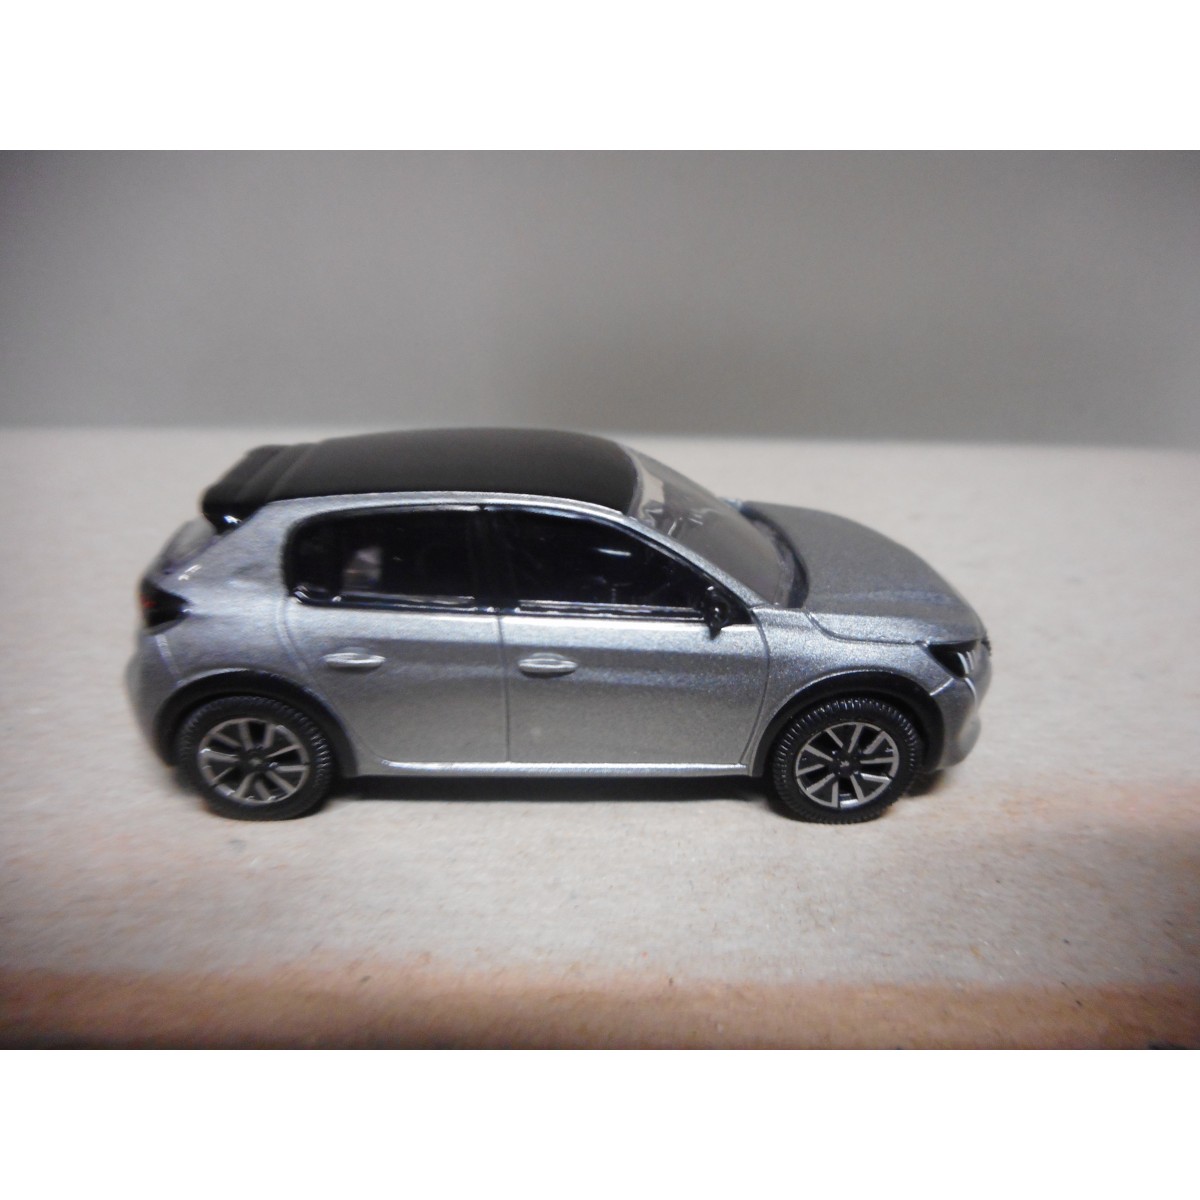 2011 NOREV 3 INCH 1/64 PEUGEOT 208 IN 3 OR 5DR & 5 CHOICE COLORS